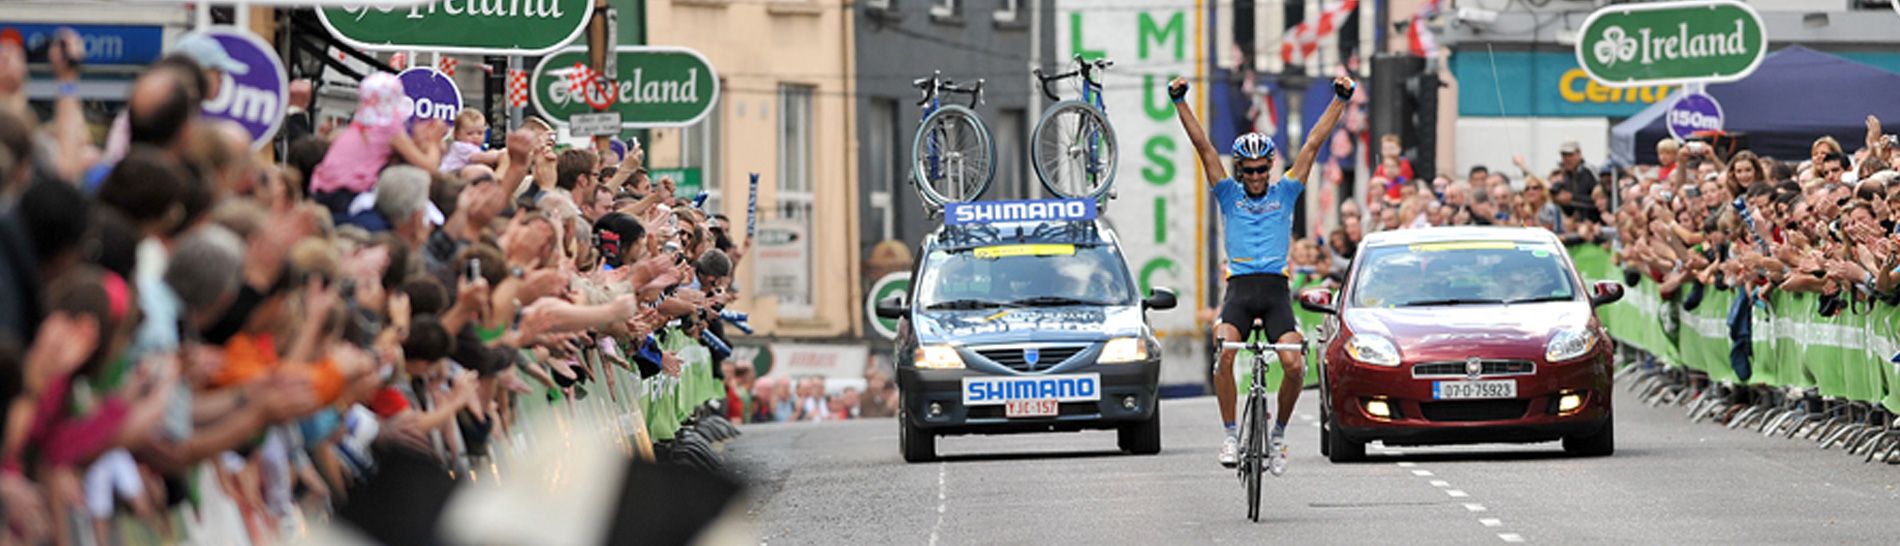 Tour of Ireland: rider approaches finish